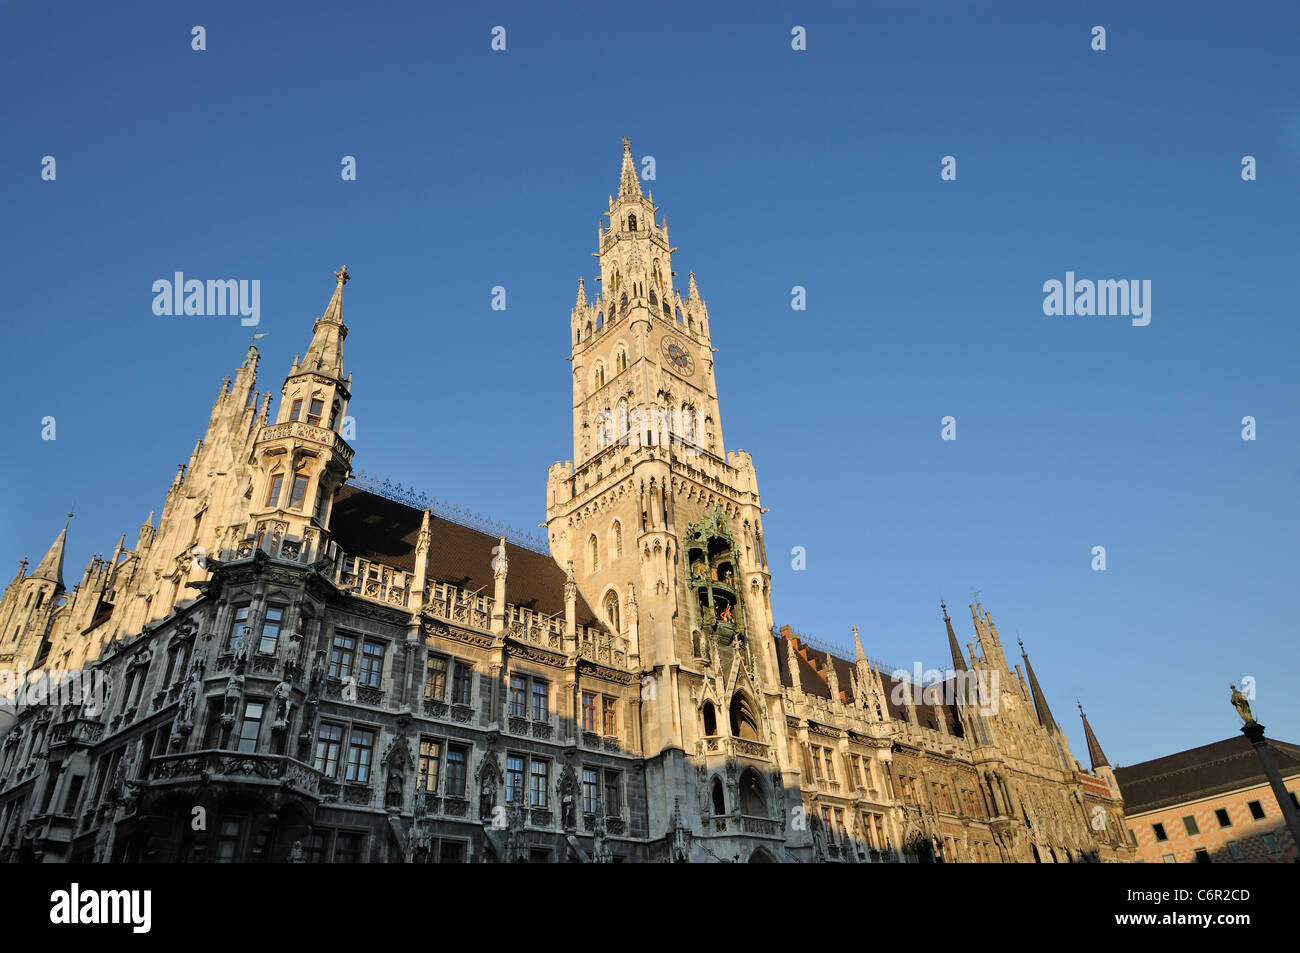 The new city hall at the Marienplatz in Munich, Germany. Stock Photo